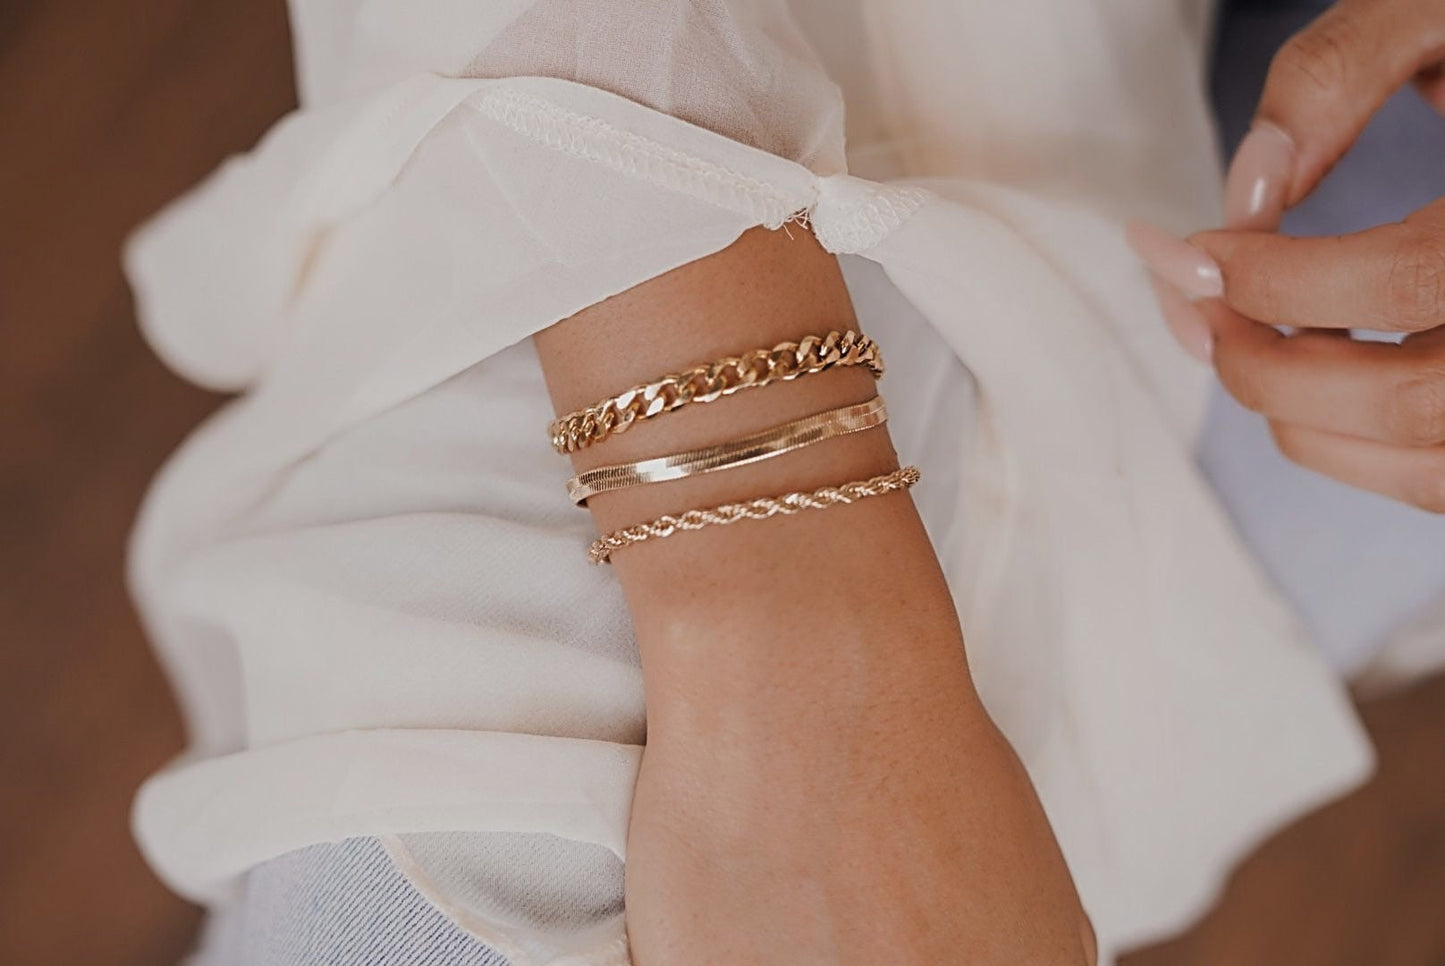 TIFFANY & CO BRACELET STACK - Including Affordable Alternatives from T & Co  - YouTube